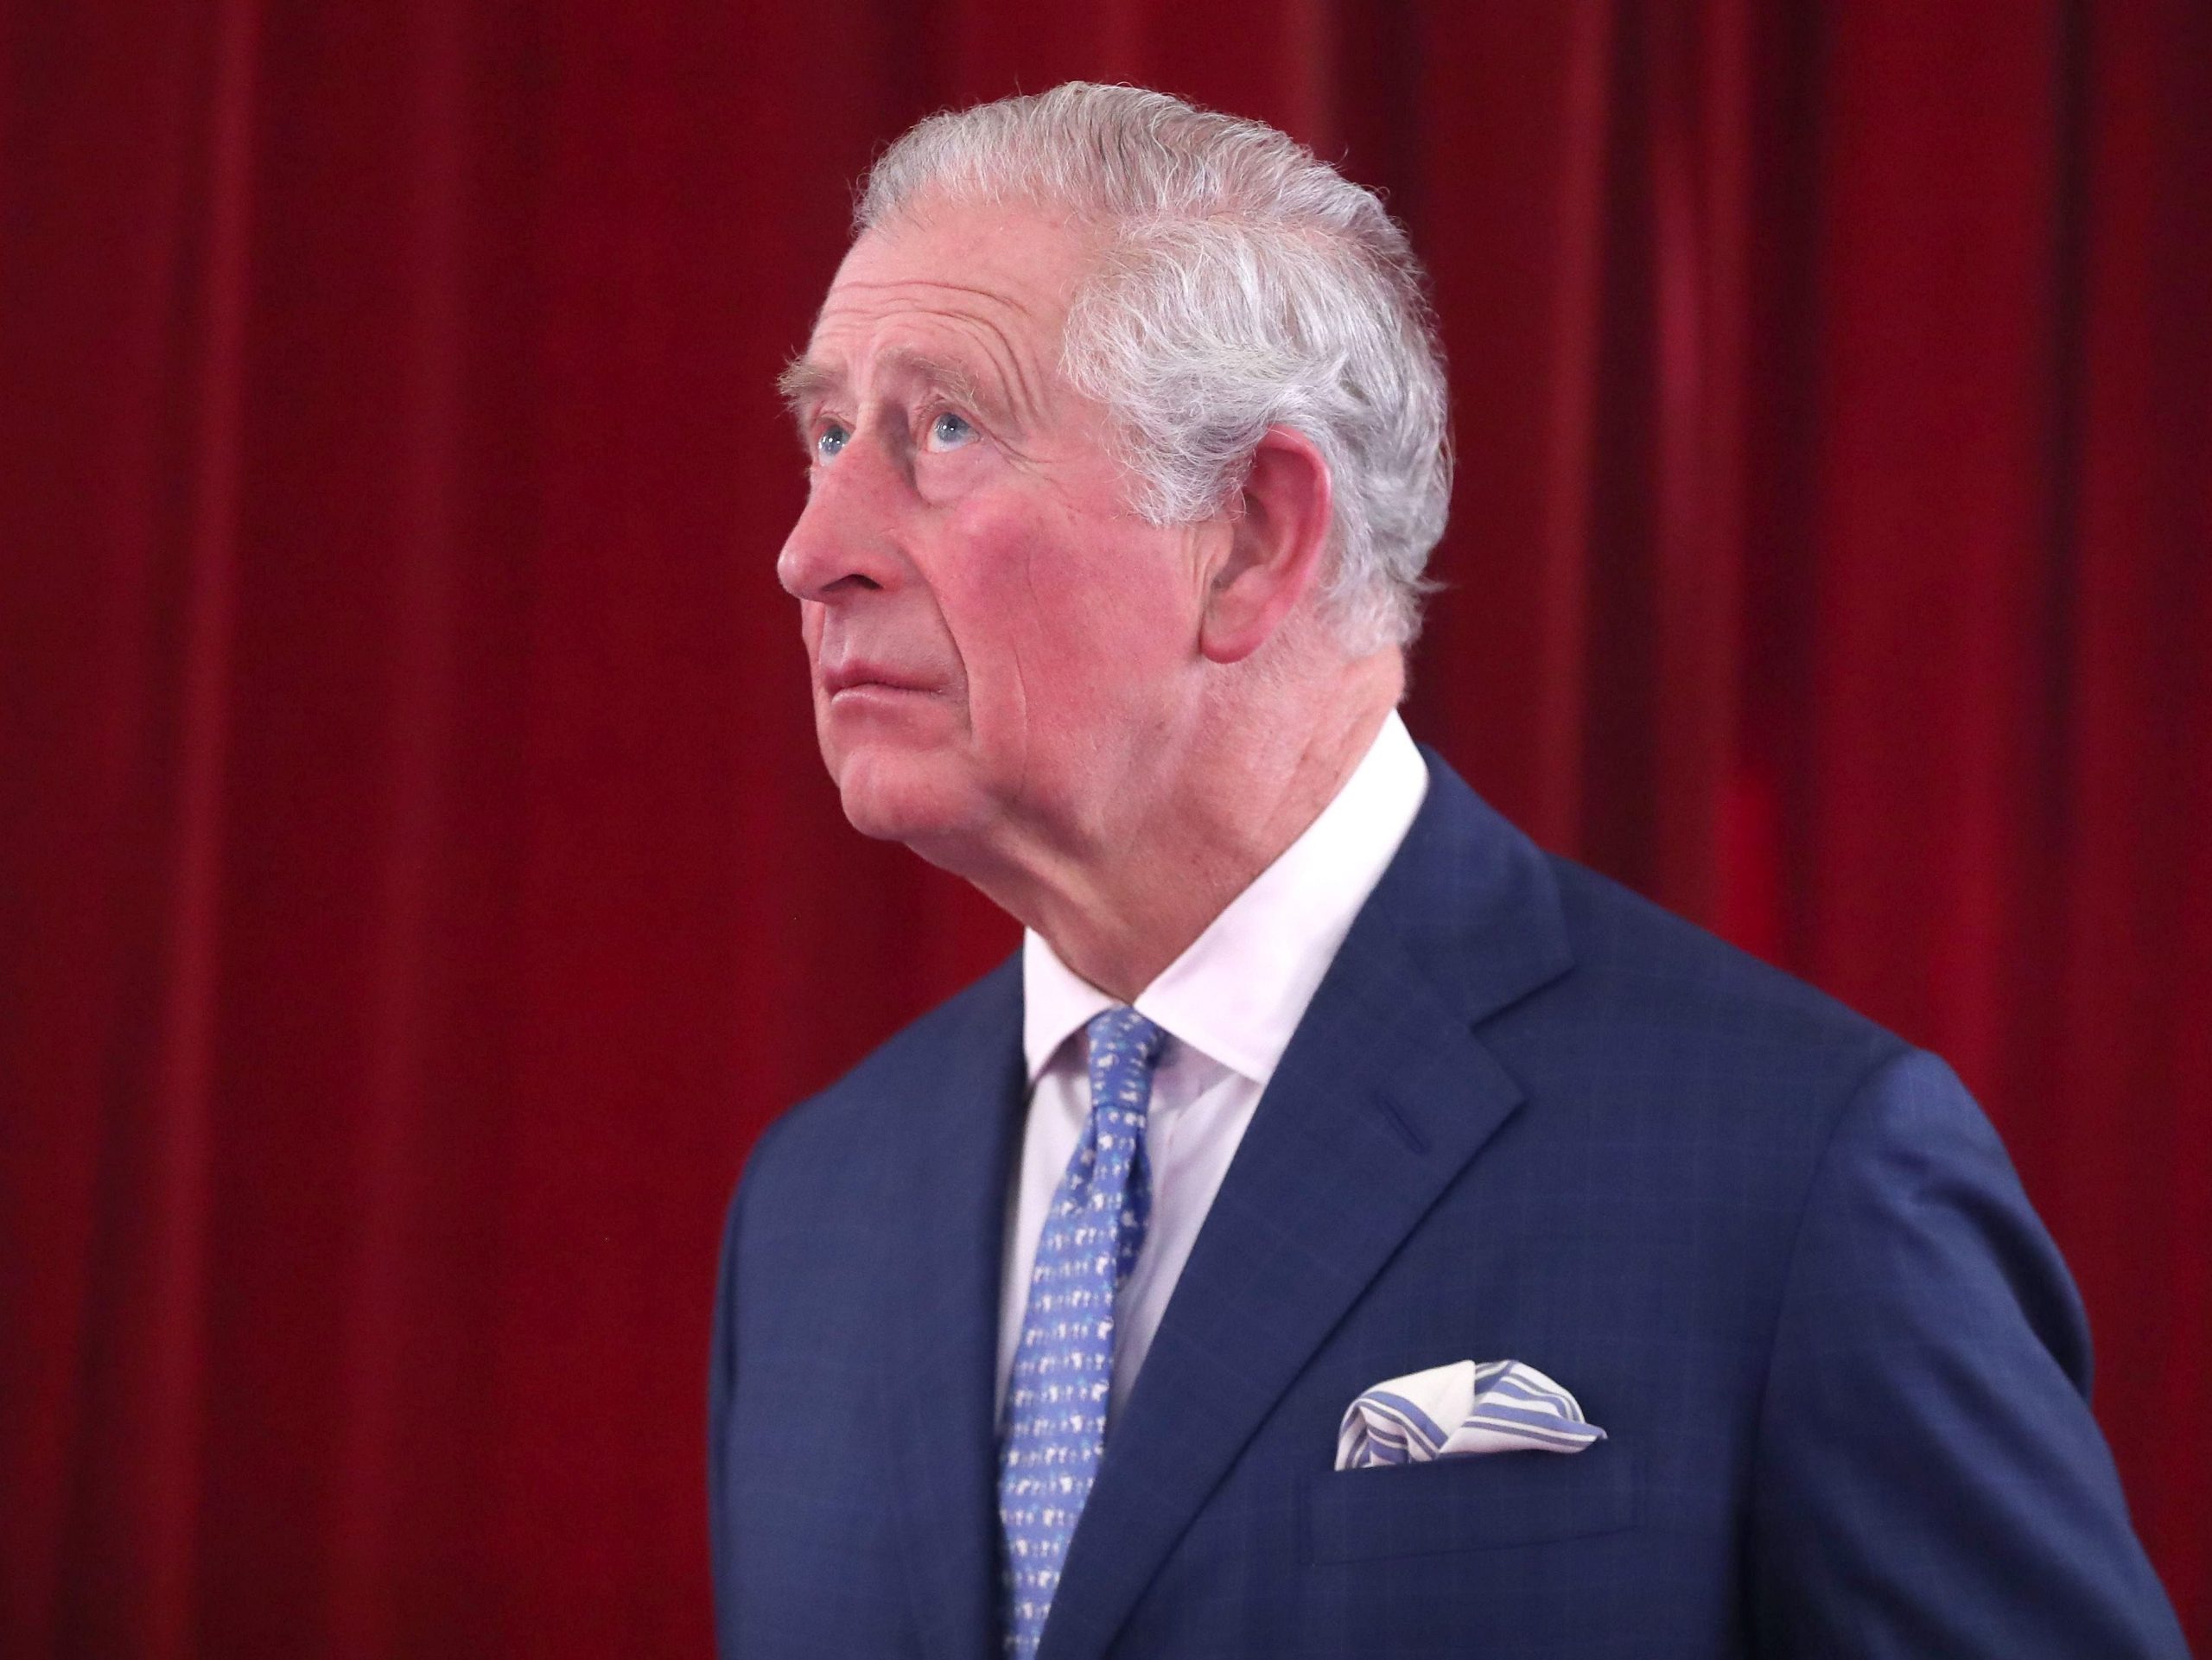 Prince Charles, Prince of Wales, is seen during the Queen Elizabeth Prize for Engineering at Buckingham Palace on December 03, 2019 in London, England.